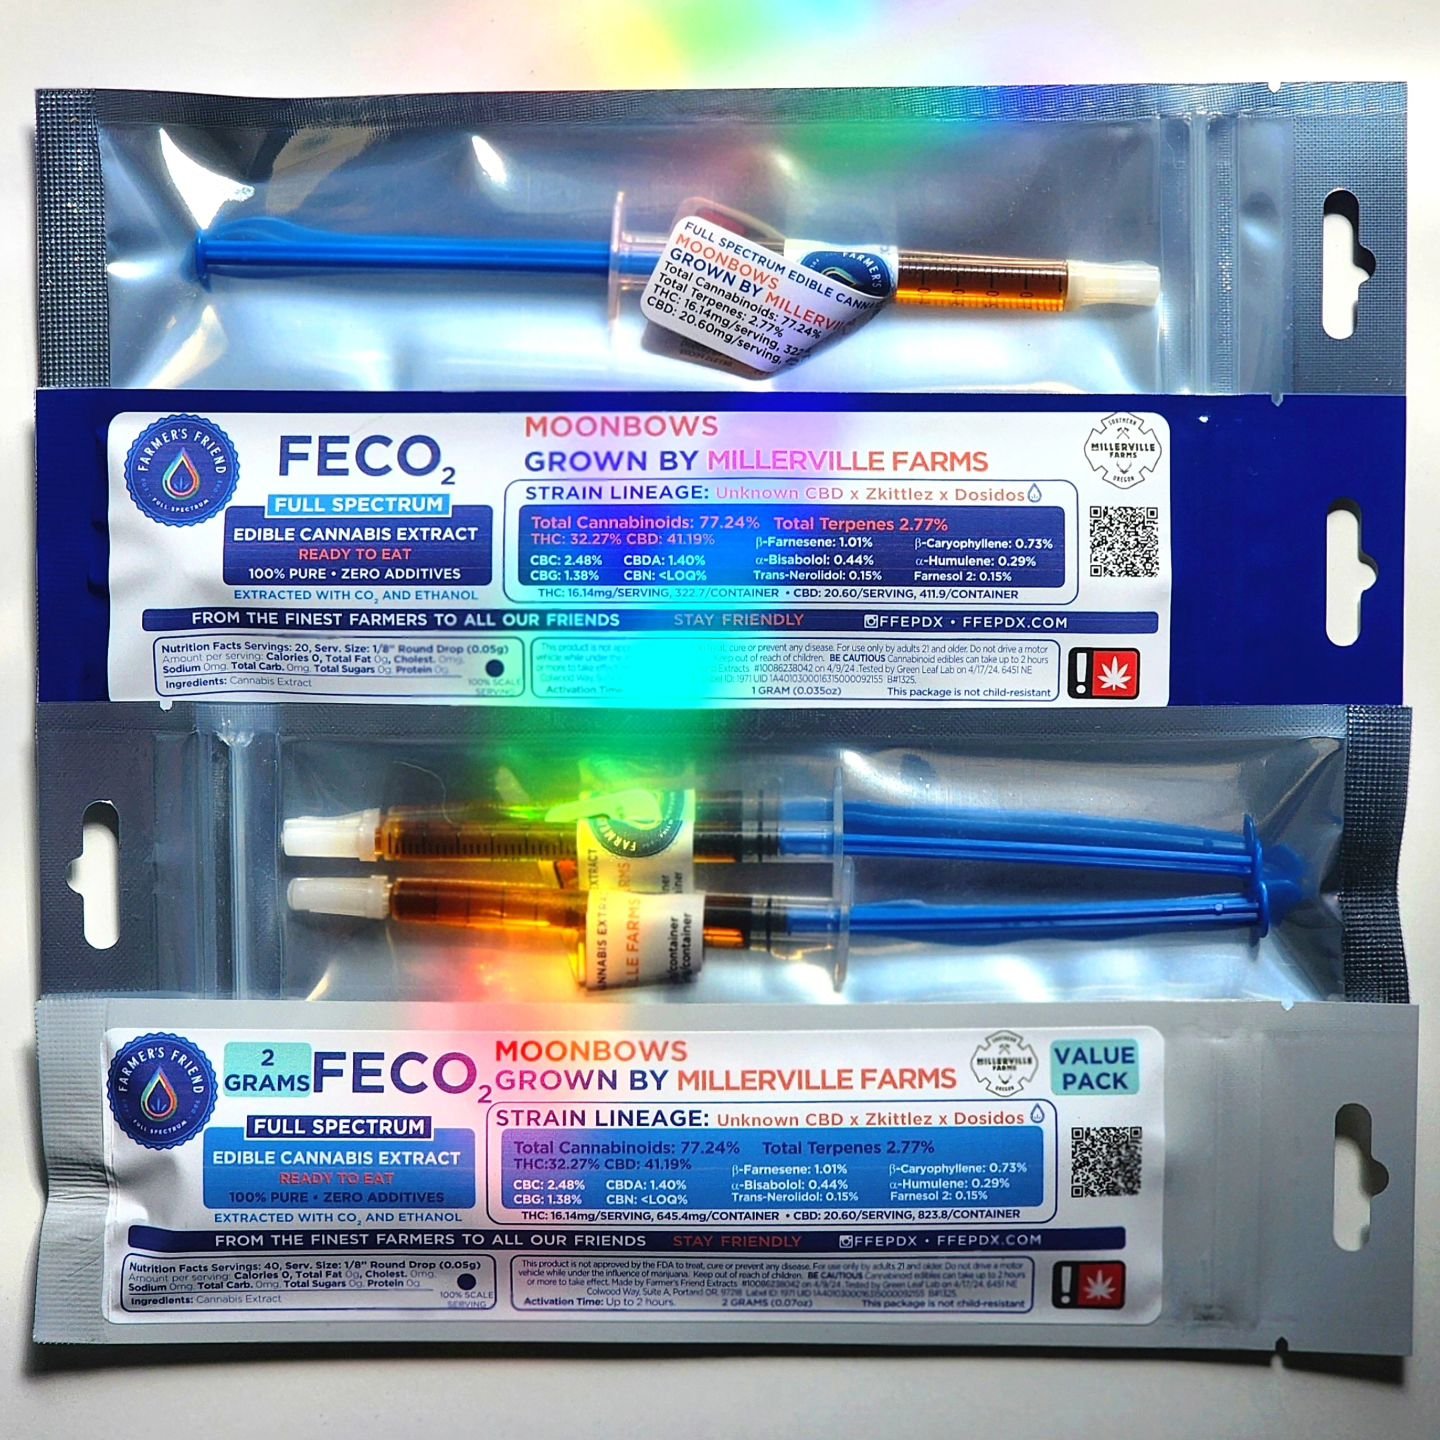 We have a beautiful new batch of FECO2 featuring Moonbows sourced from the master growers at Millerville Farms. Moonbows is loved for its balanced properties- calming yet uplifting and euphoric. With a 1:1 ratio of CBD:THC, this FECO2 contains a robu